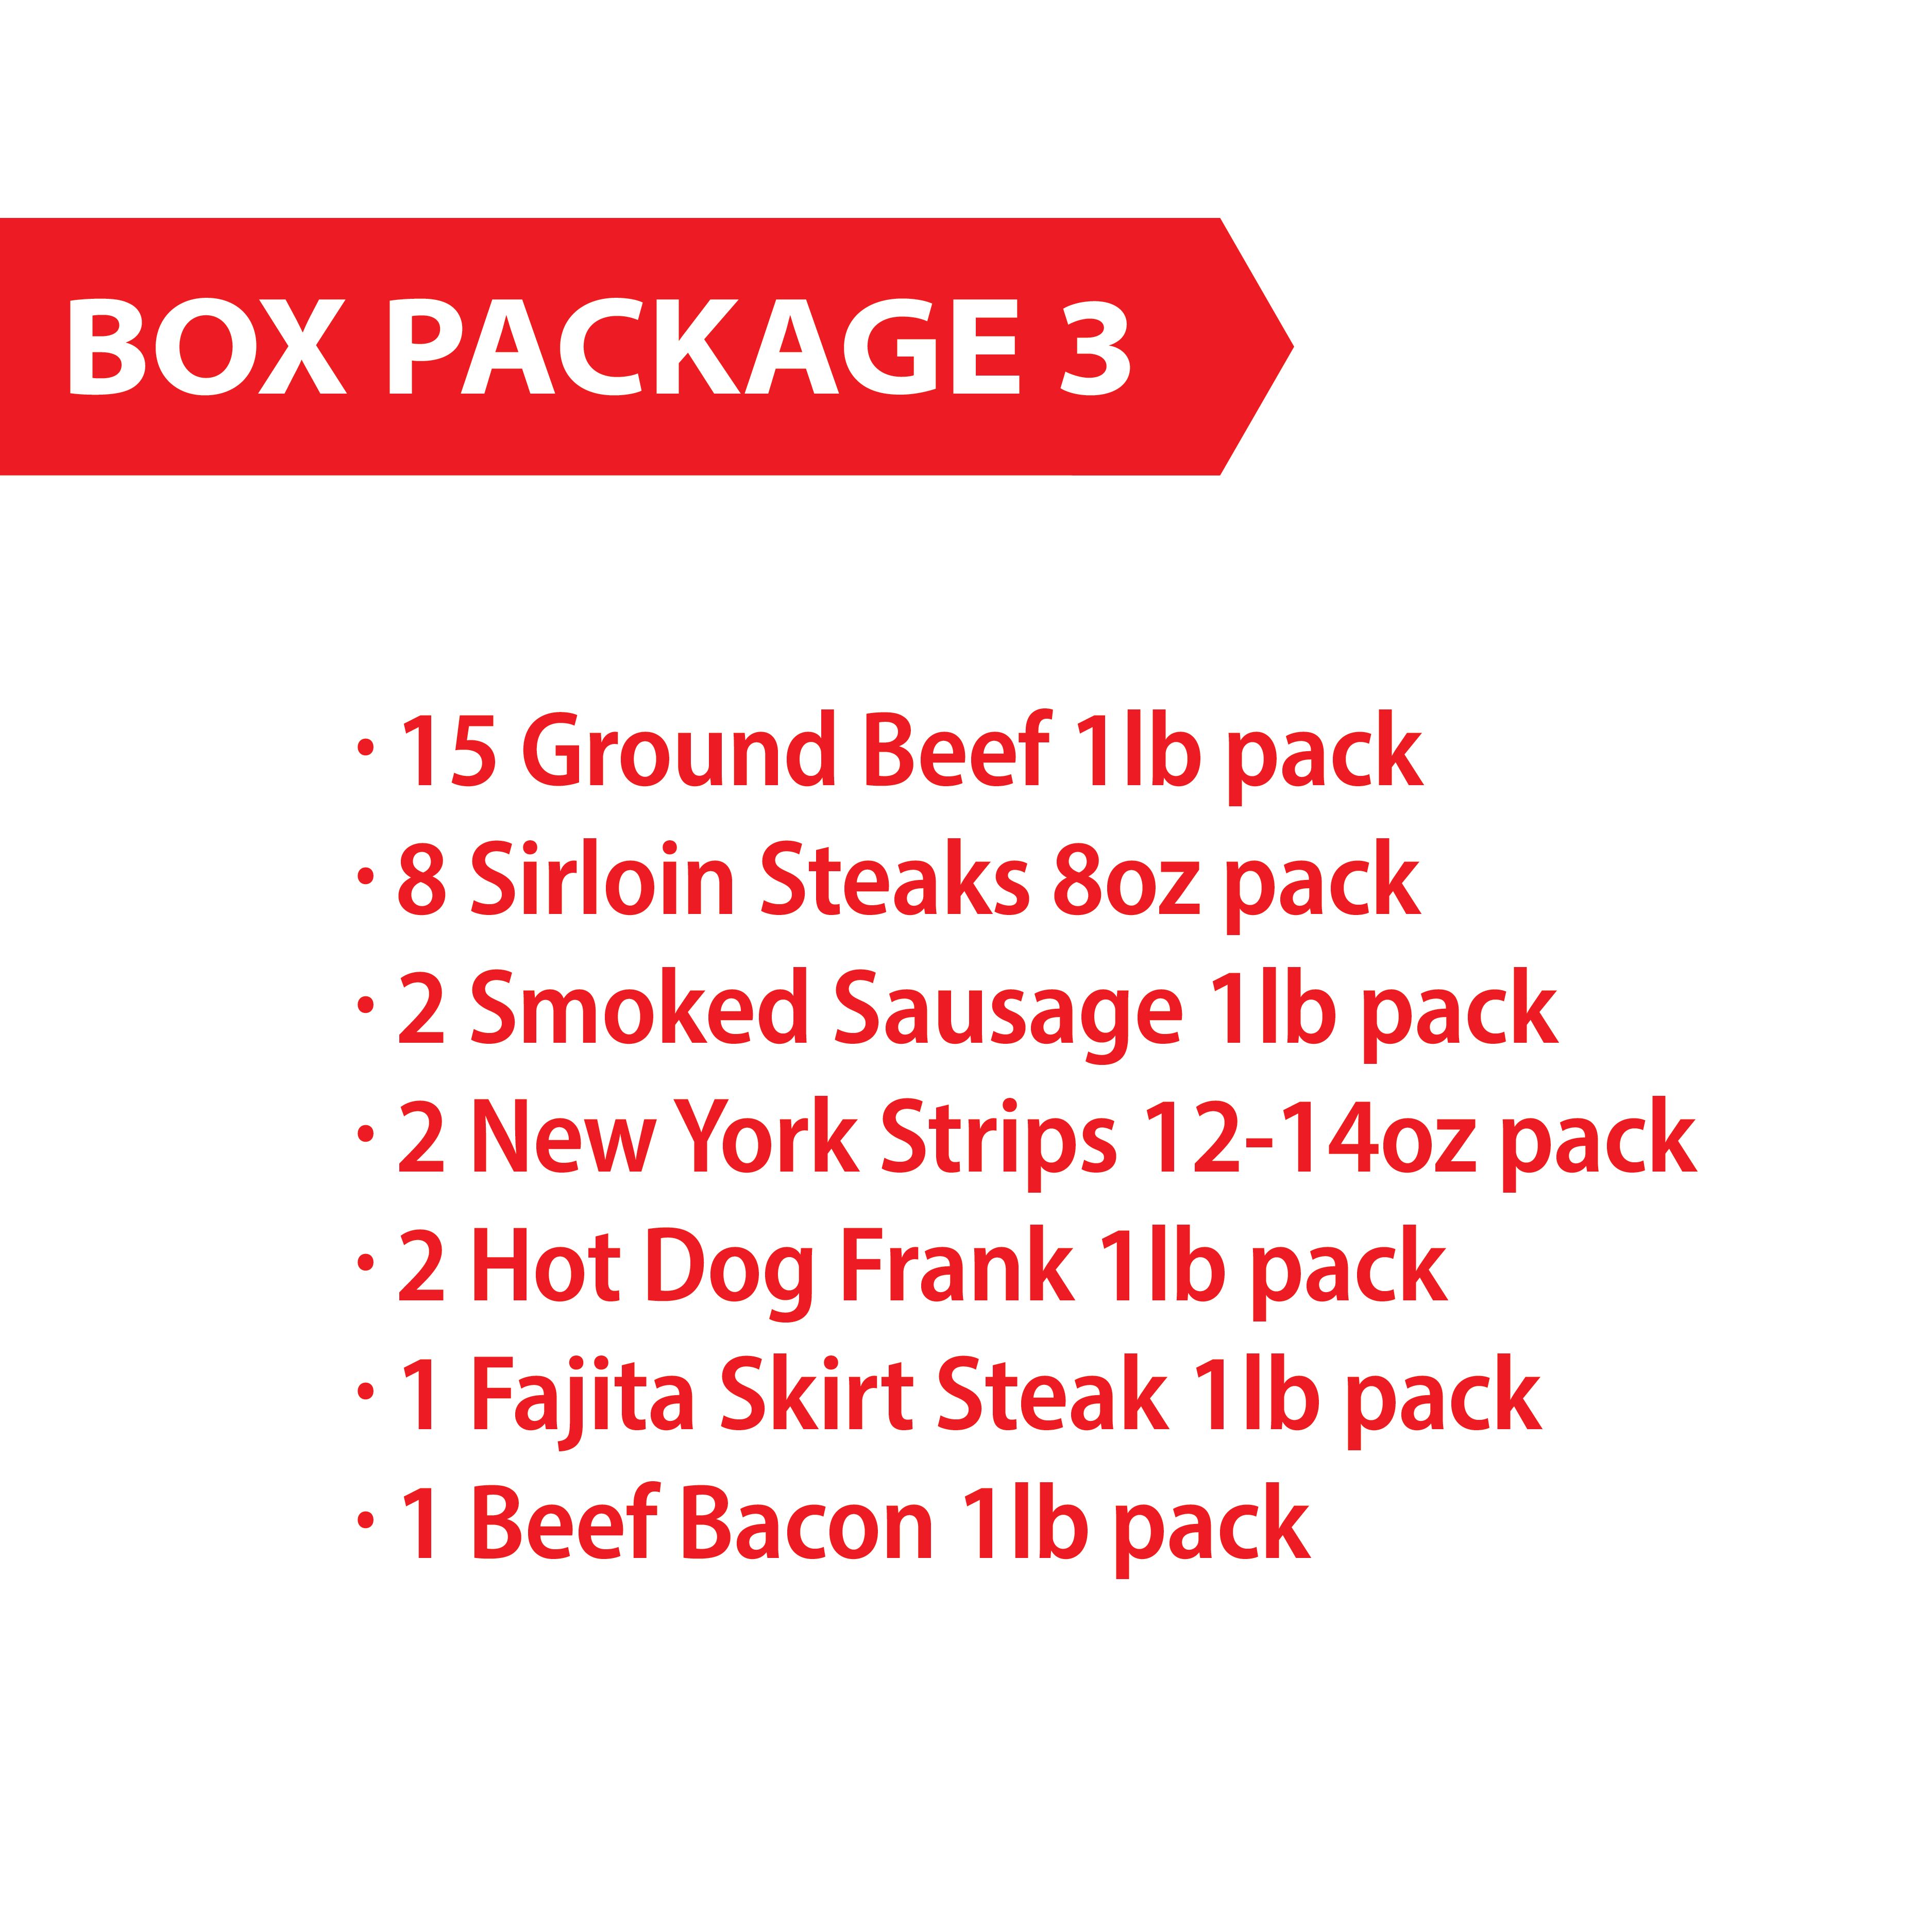 Box Packages